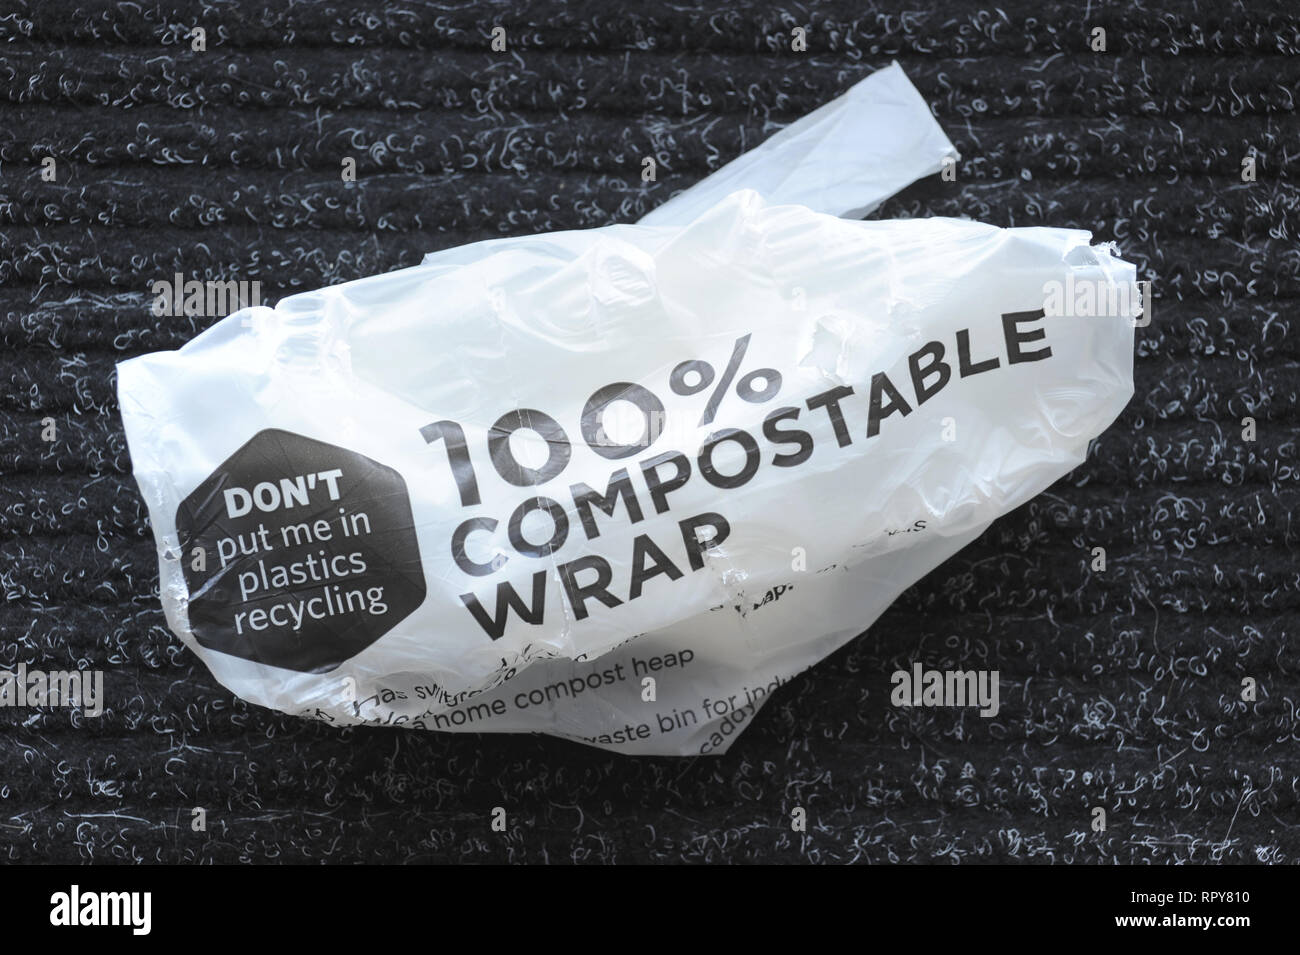 COMPOSTABLE MAGAZINE WRAPPER RE THE ENVIRONMENT RECYCLING PLASTICS WASTE CARBON EMISSIONS ETC UK Stock Photo